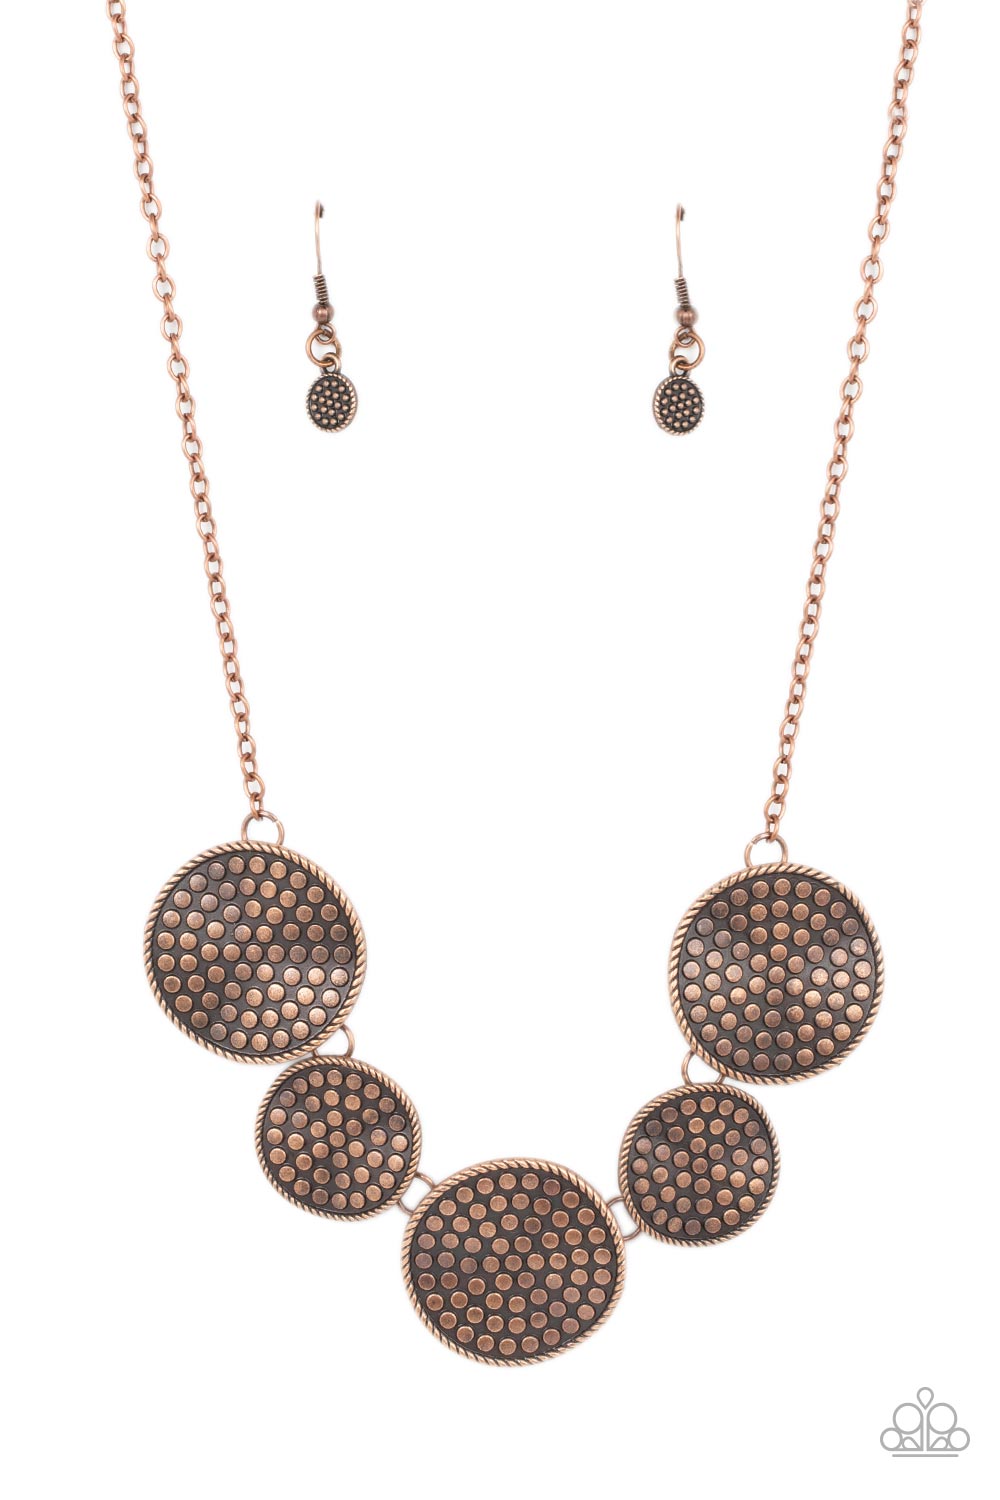 Necklace - Self DISC-overy - Copper